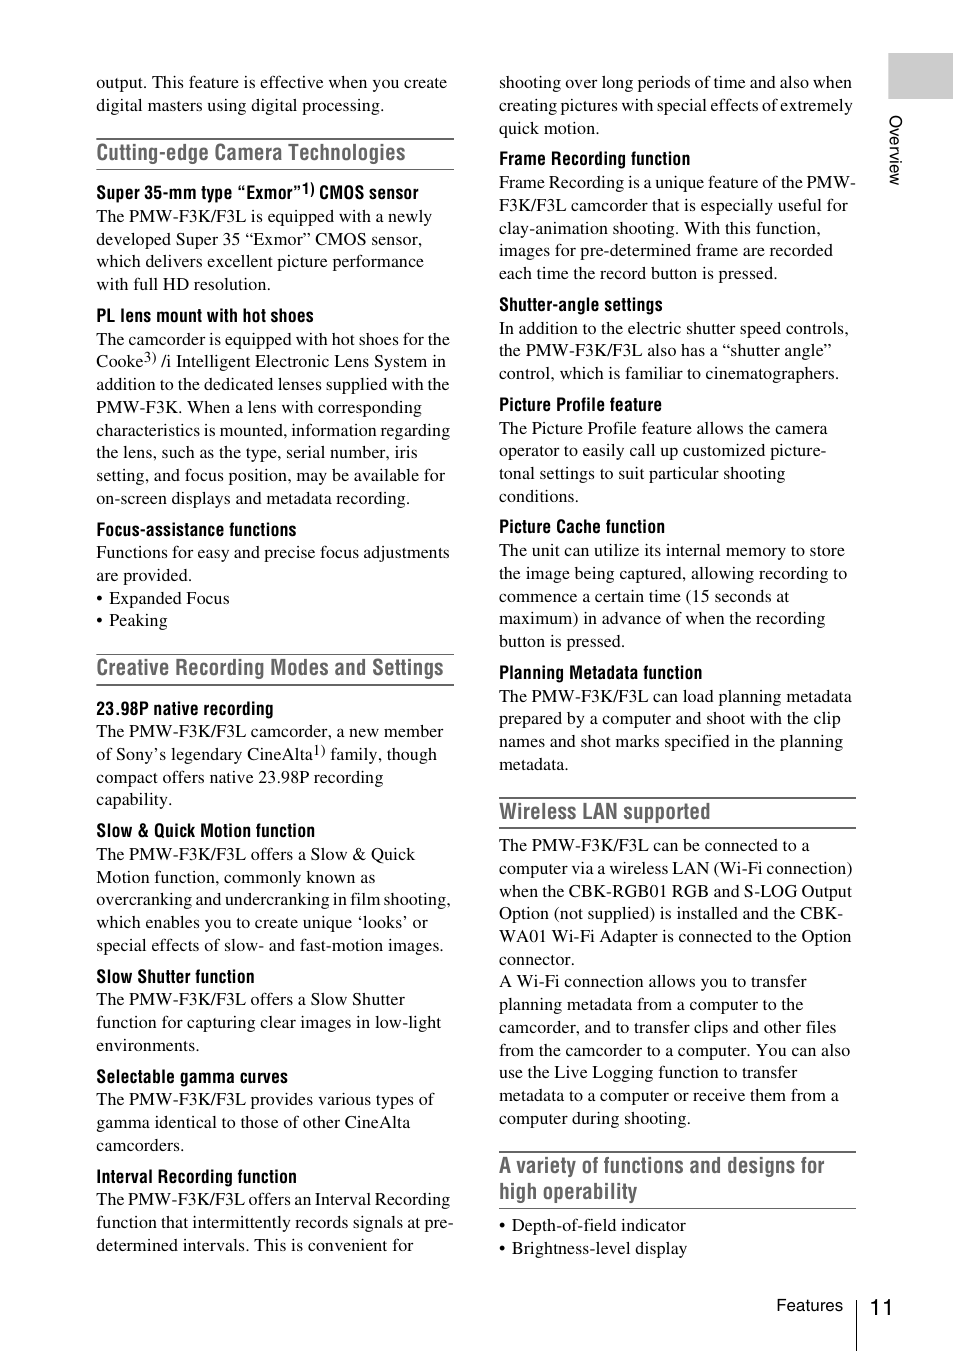 Cutting-edge camera technologies, Creative recording modes and settings, Wireless lan supported | Sony PMW-F3K User Manual | Page 11 / 164